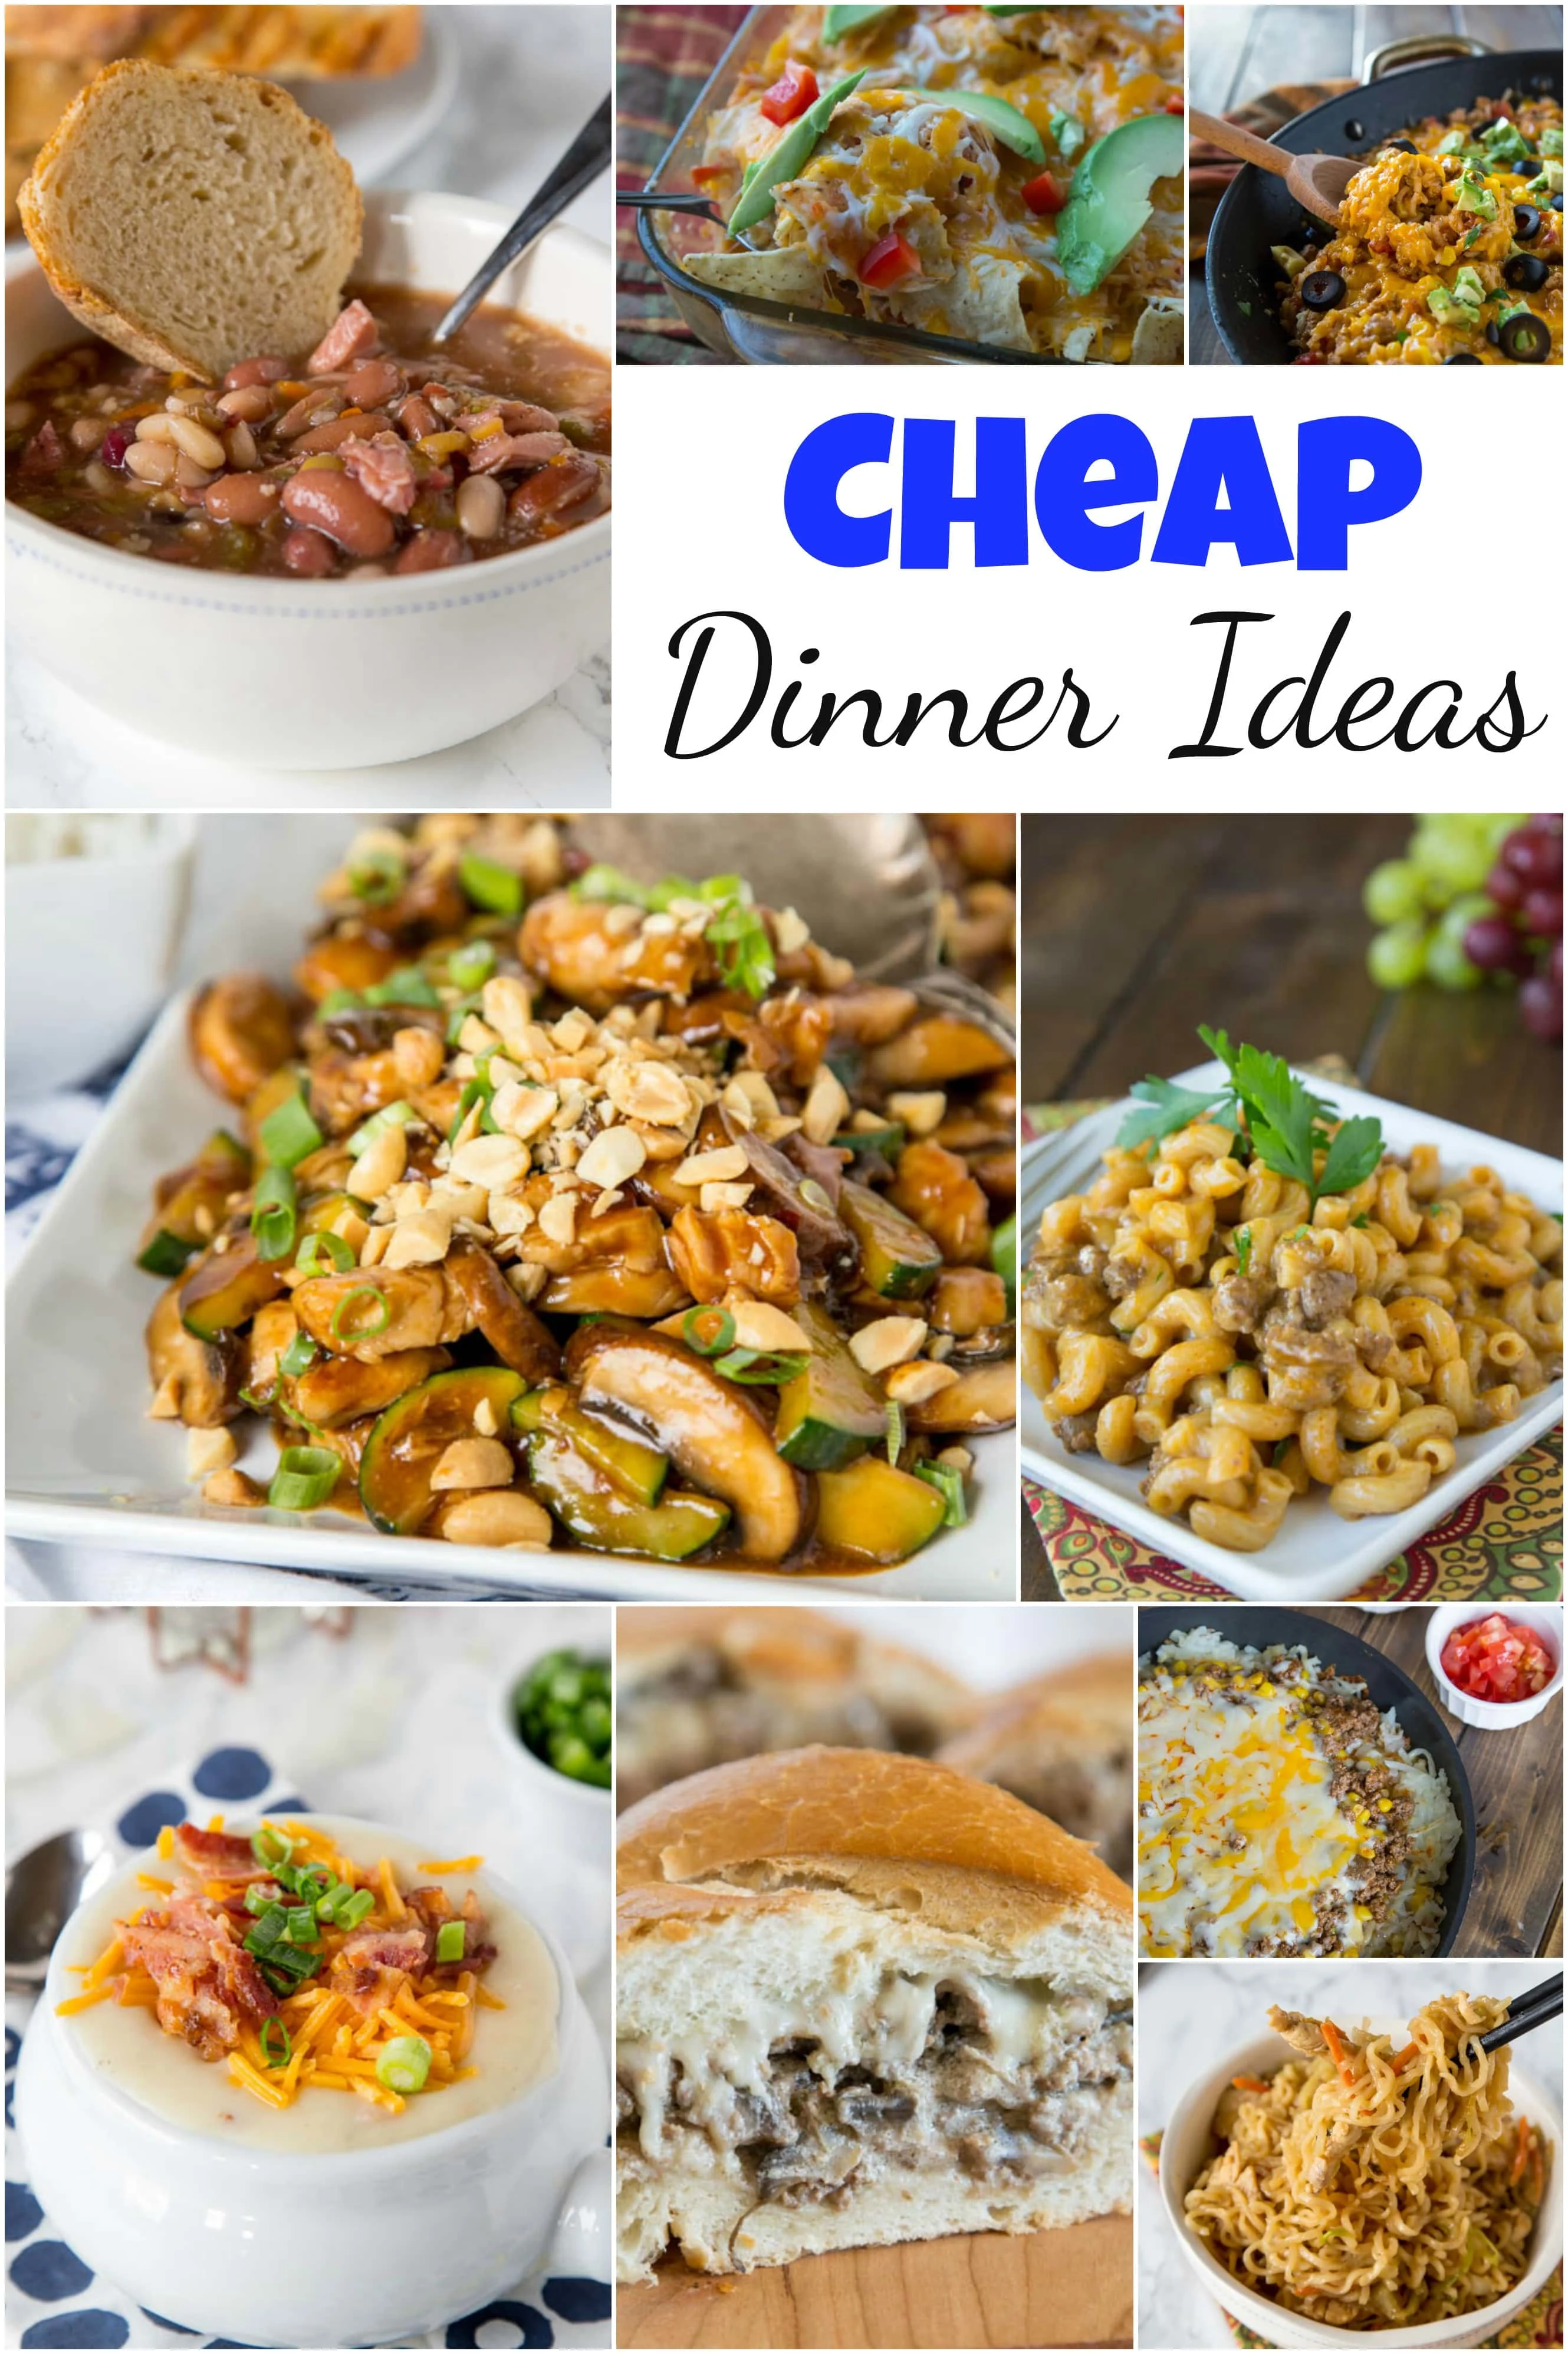 Cheap Dinner Ideas - want dinner ideas that won't break the bank?  Here are 25 of my favorite dinner recipes that are cheap and easy for any night of the week!